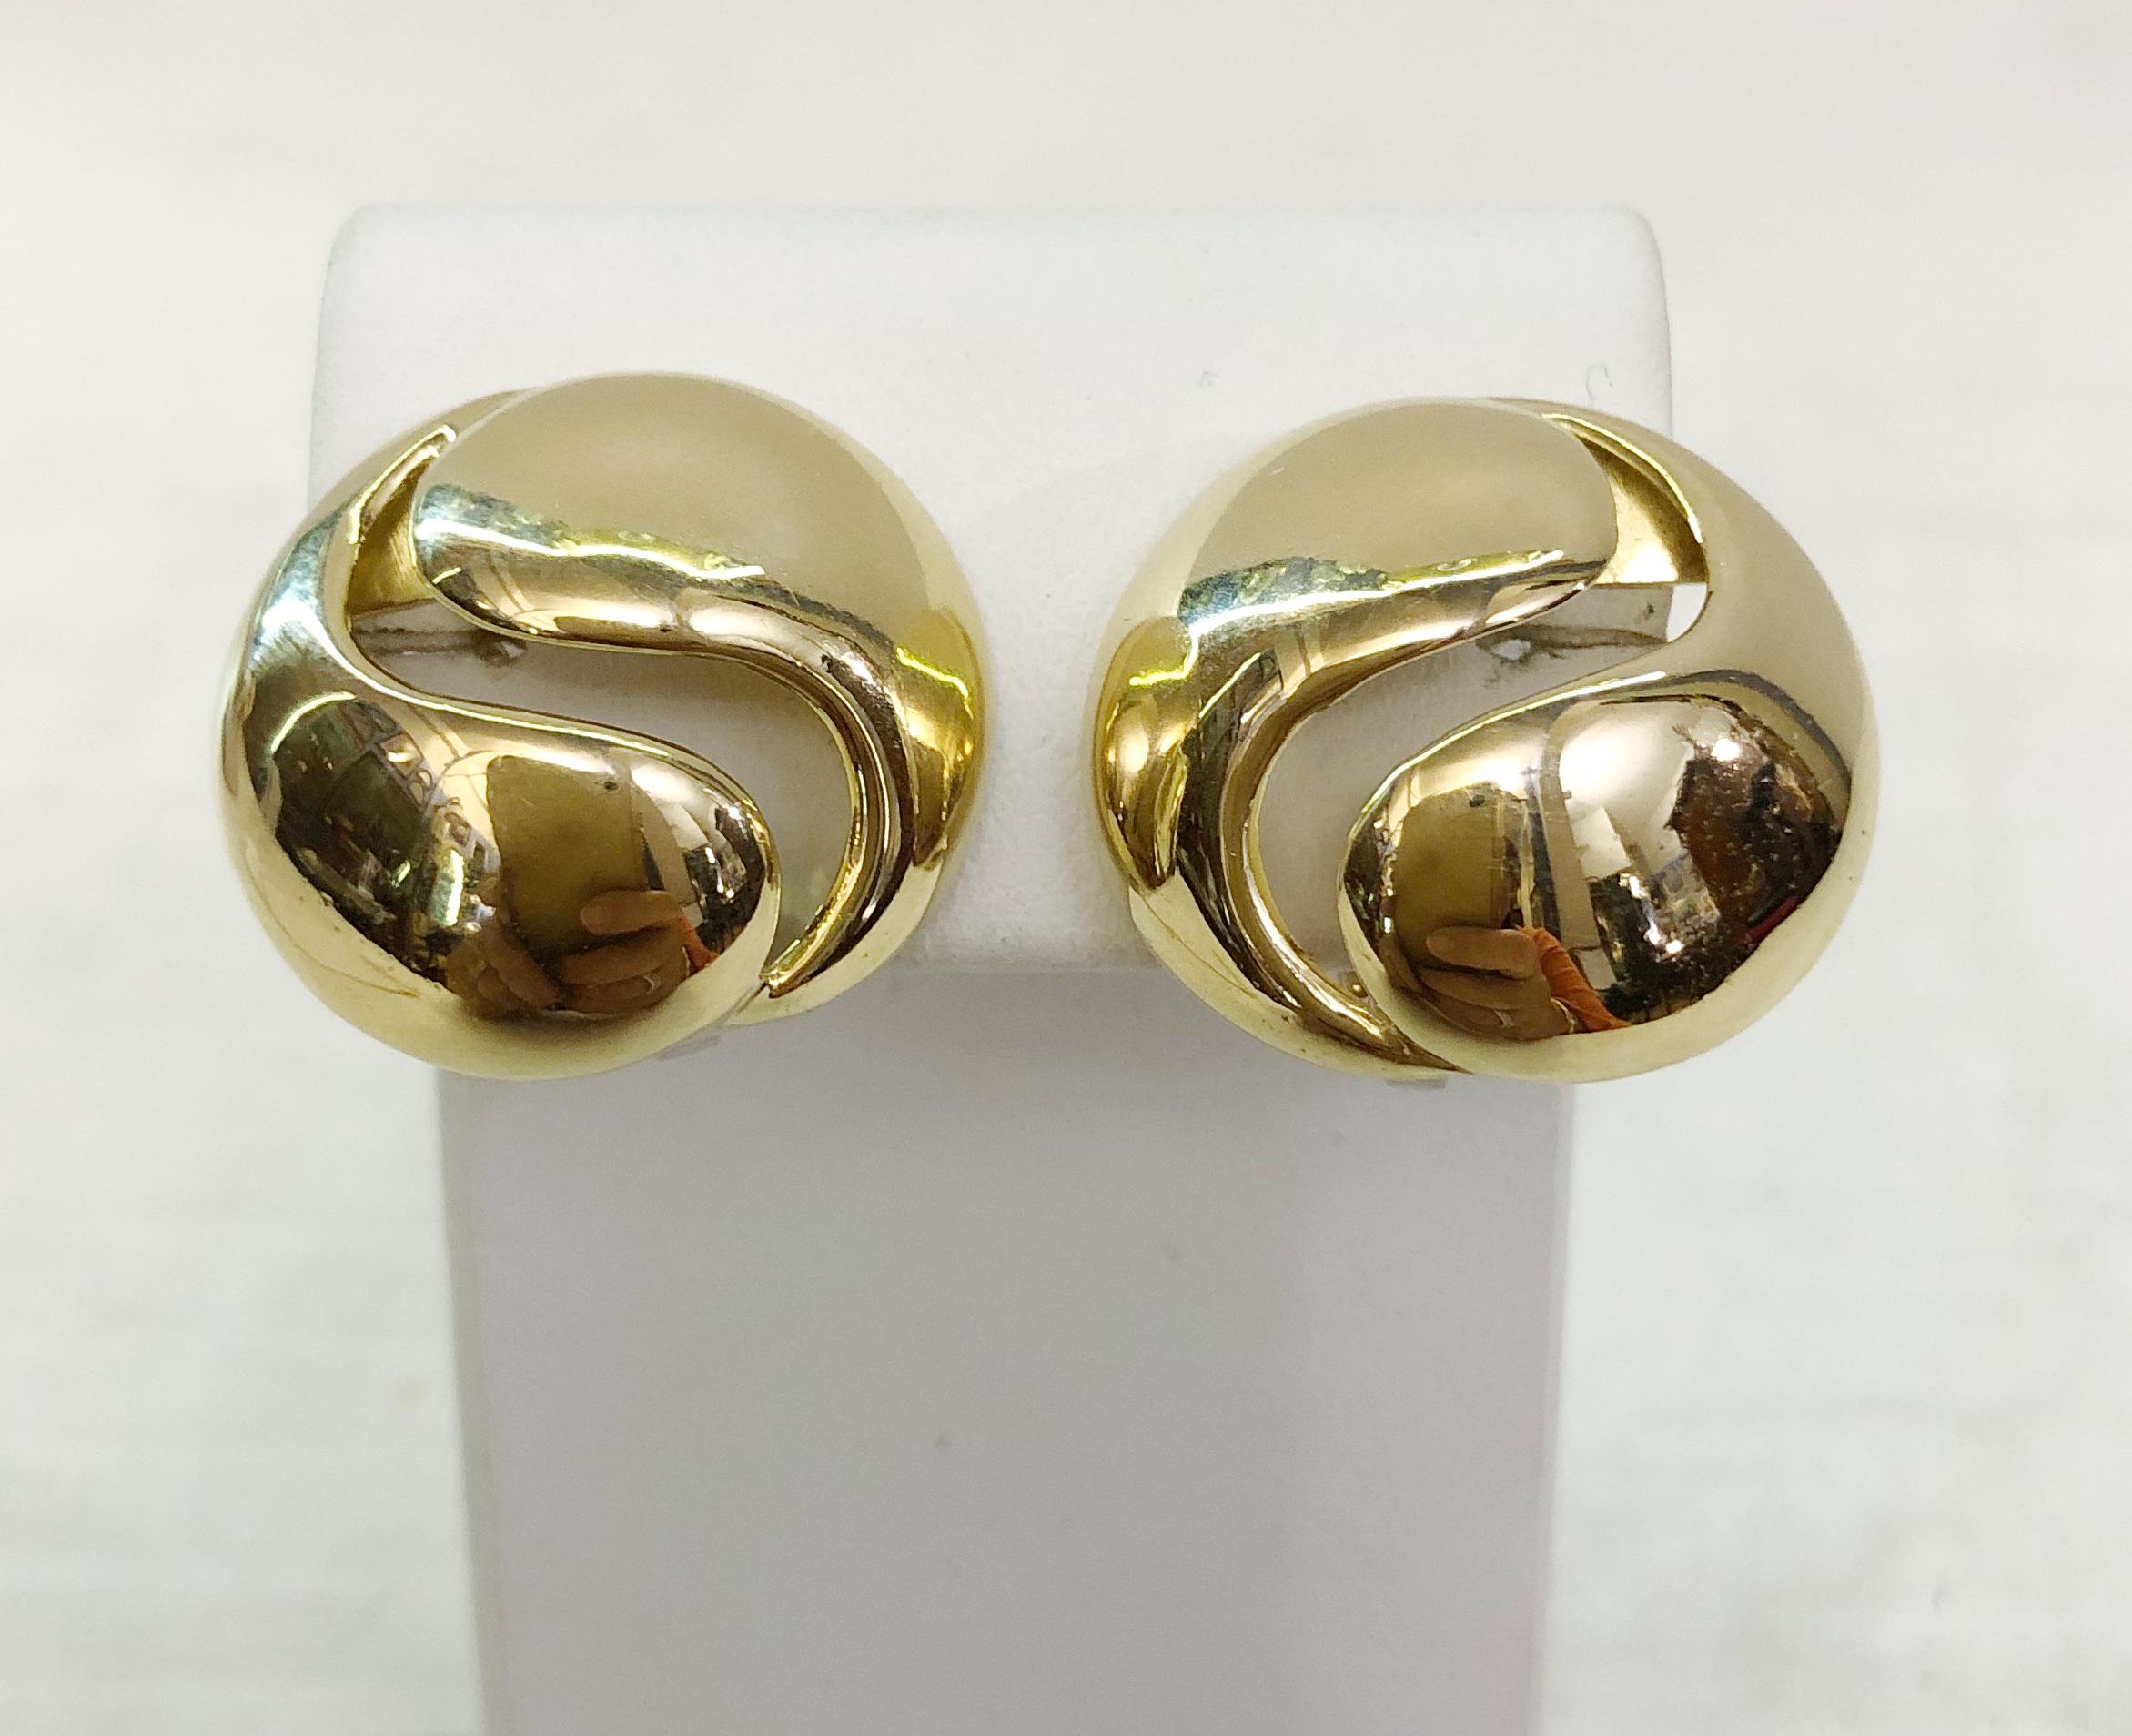 Pair of vintage earrings in 18 karat yellow gold in satin and smooth finish, signed CUSI Milan / Made in Italy 1990s